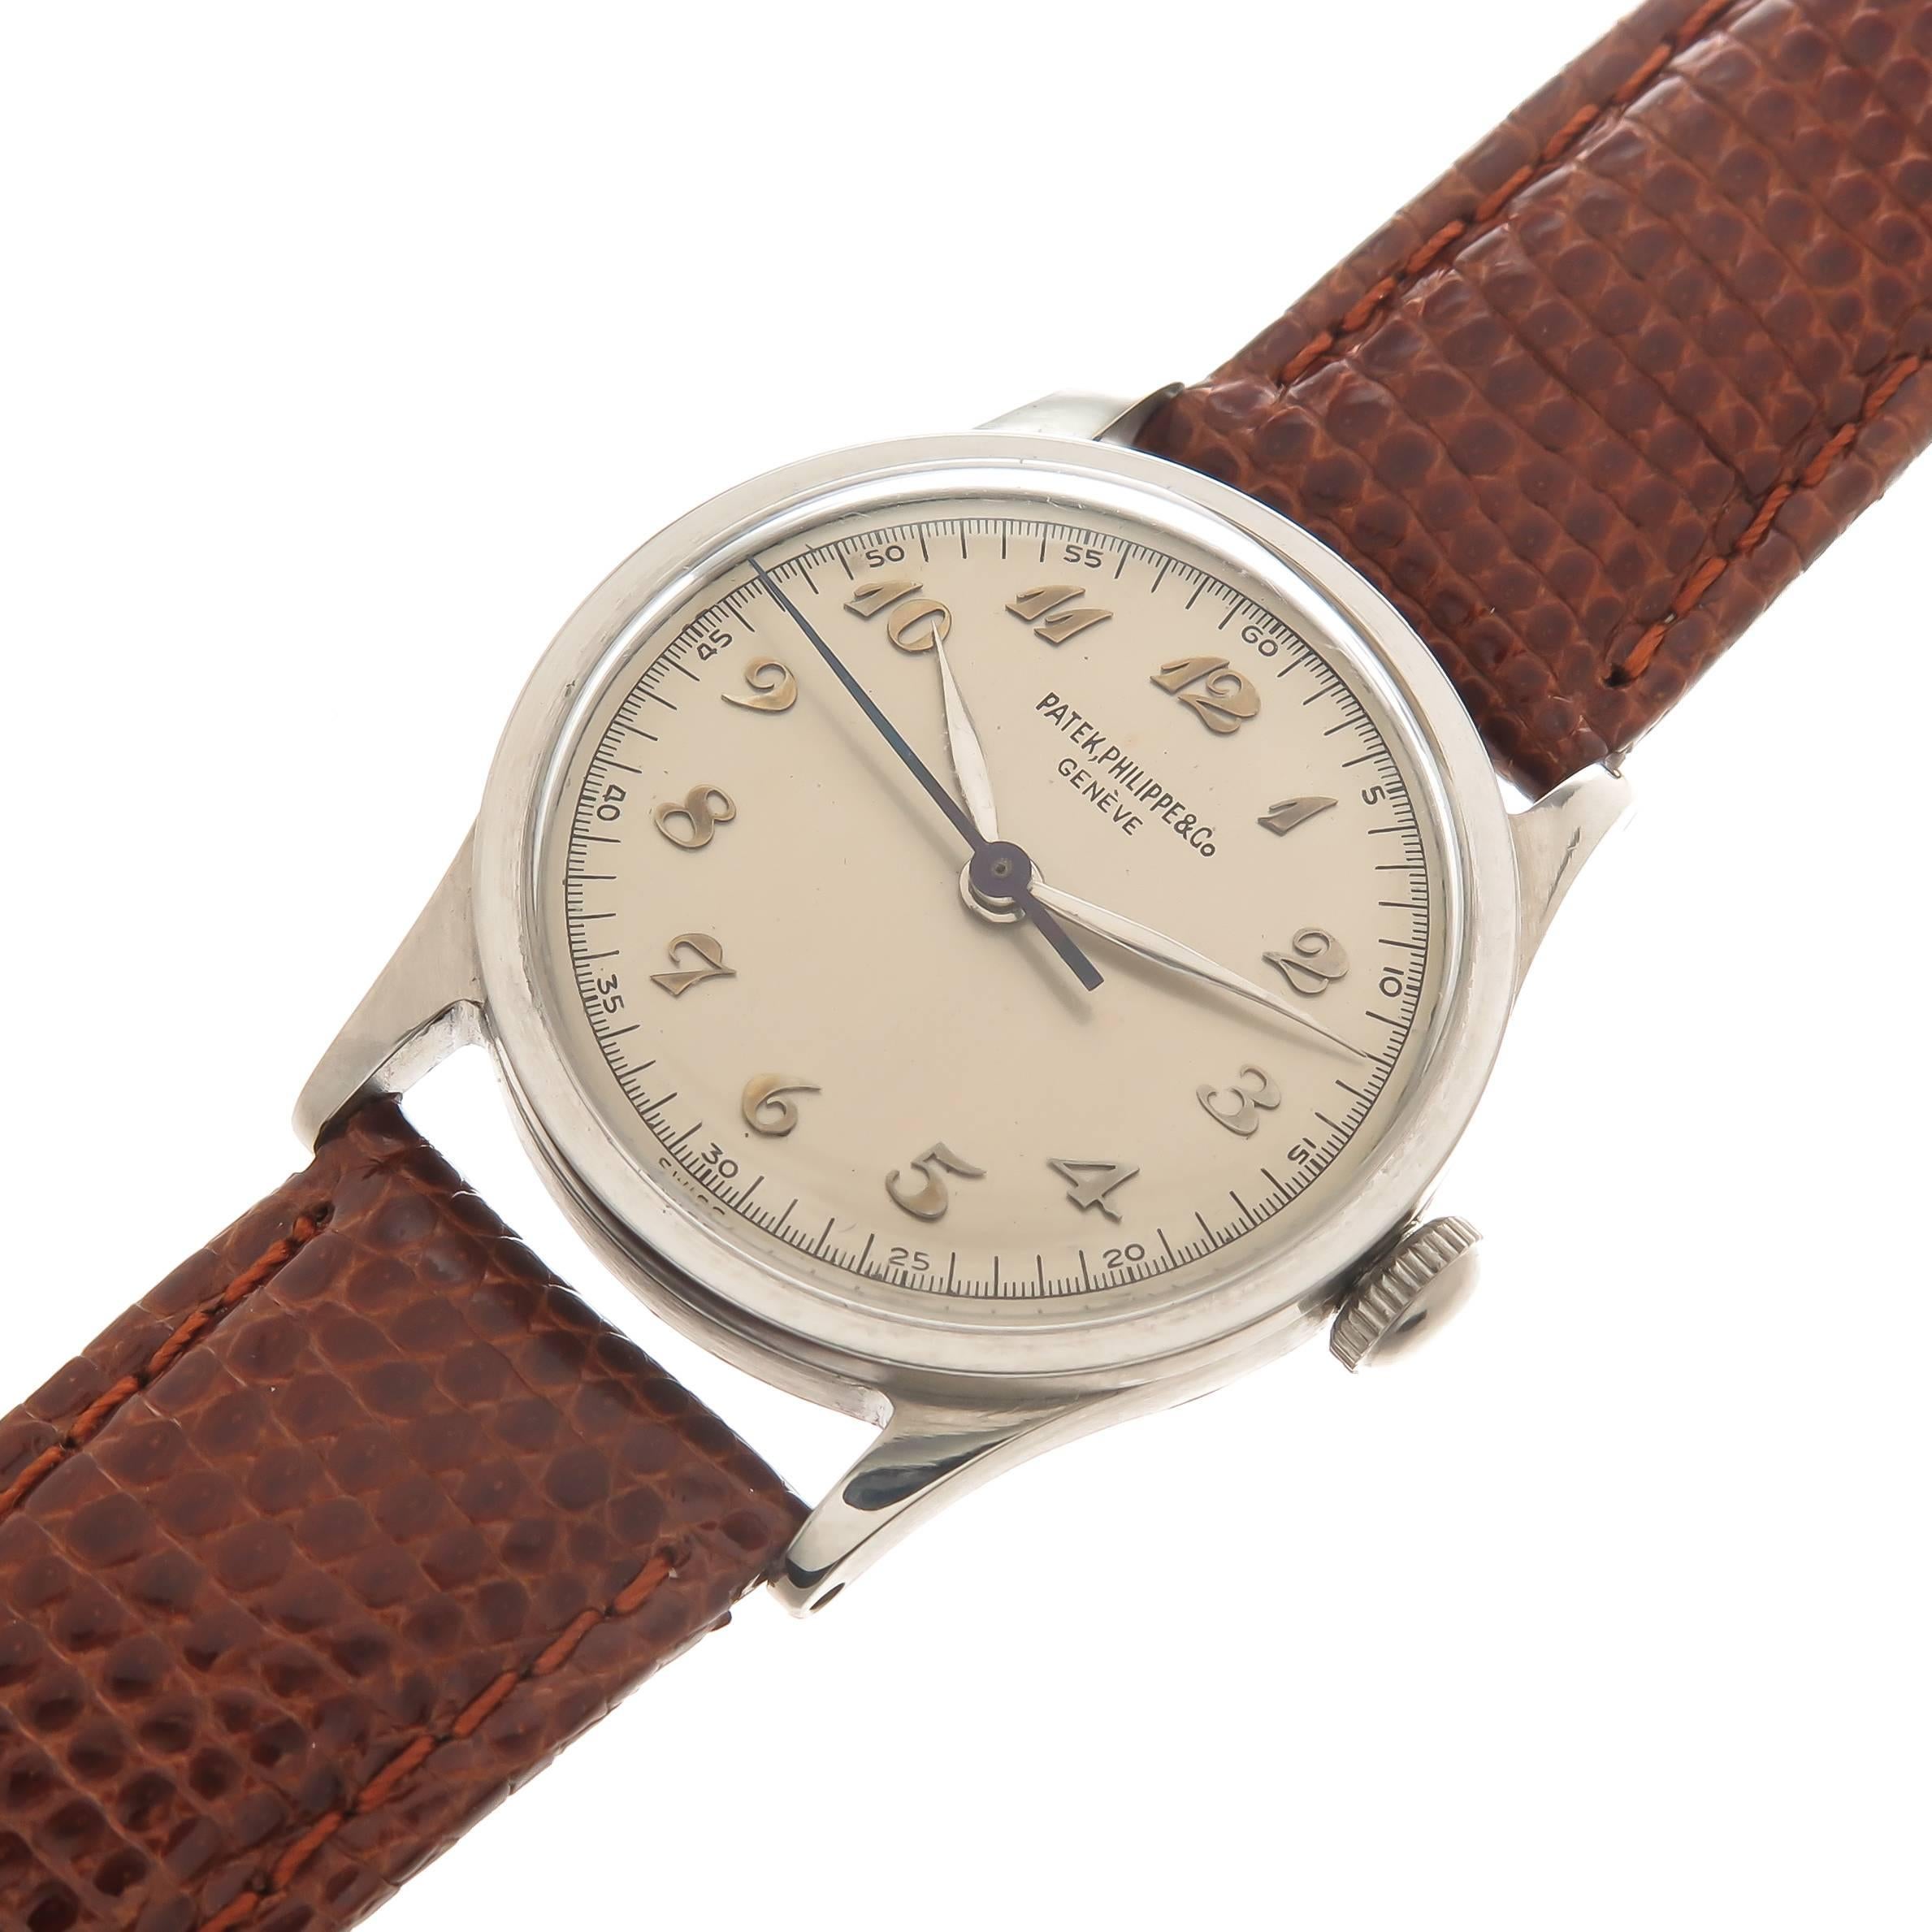 Circa 1940s Patek Philippe Reference 96 Calatrava In a 30 MM 3 piece Stainless Steel Case. Manual wind 20 Jewel Movement. Original, mint Silvered Dial with Raised Gold Breguet Numbers and a sweep seconds hand. Triple signed, with all correct case